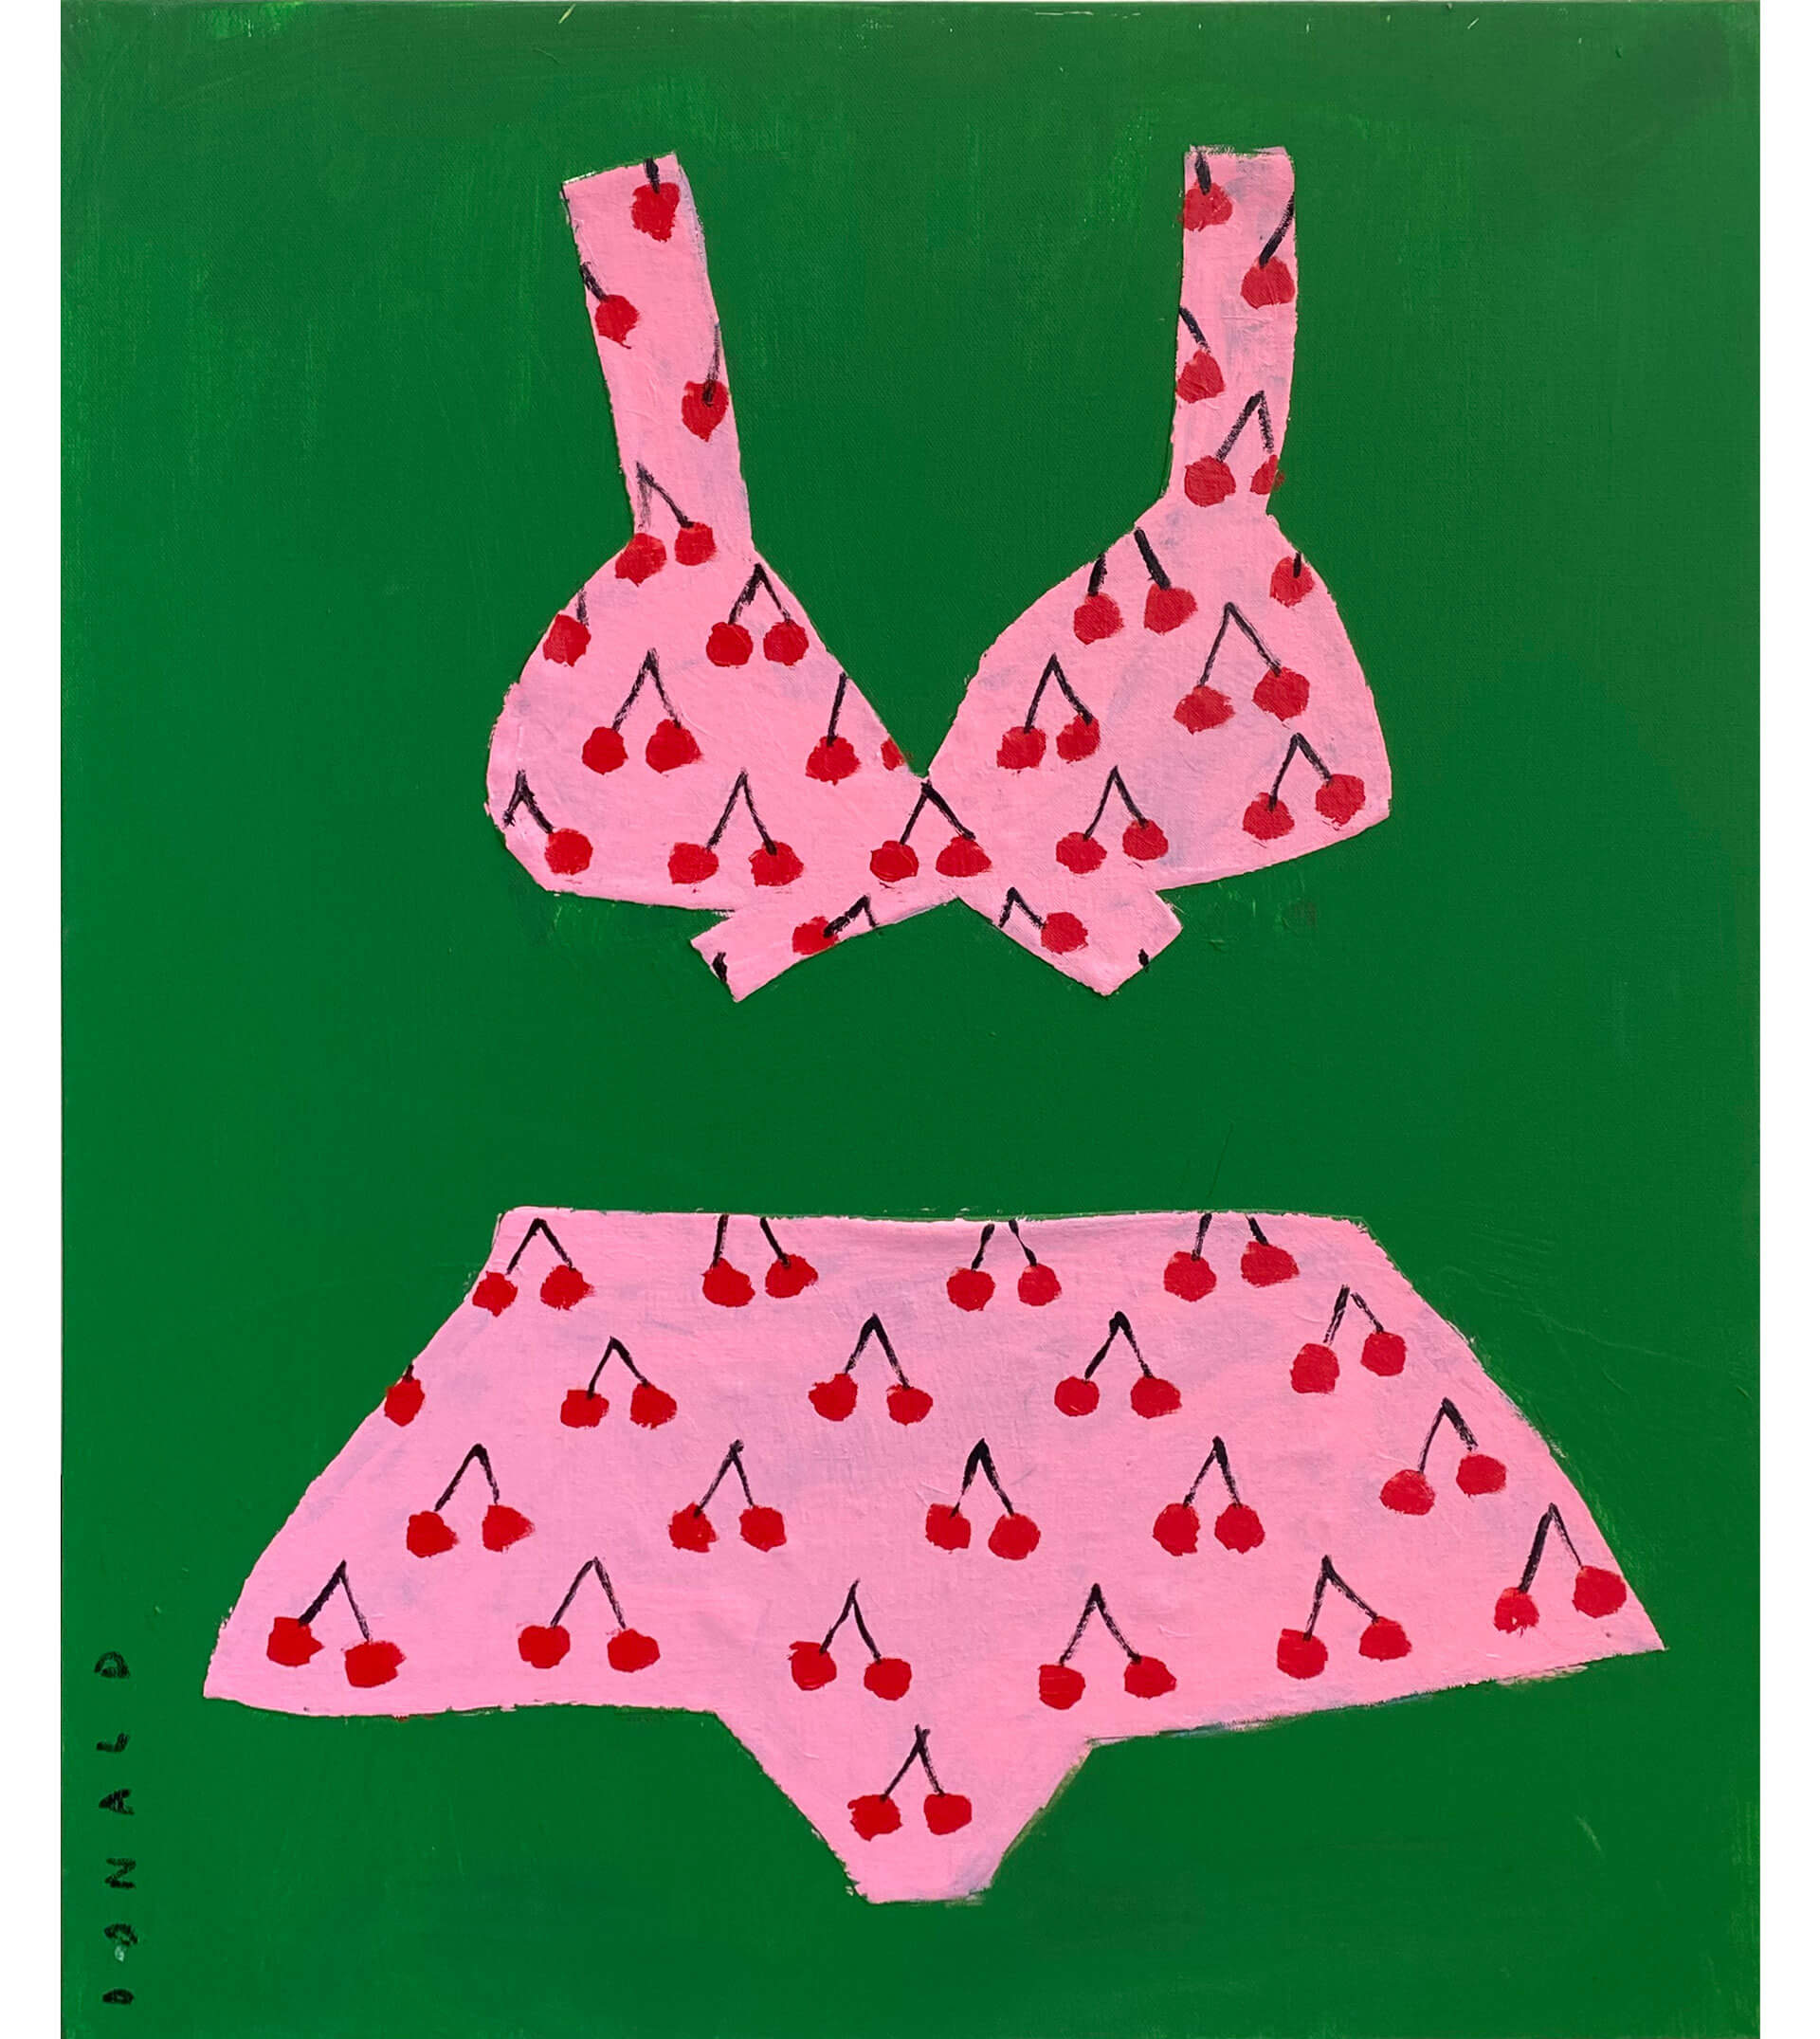 DONALD ROBERTSON Cherrys on a Two Piece